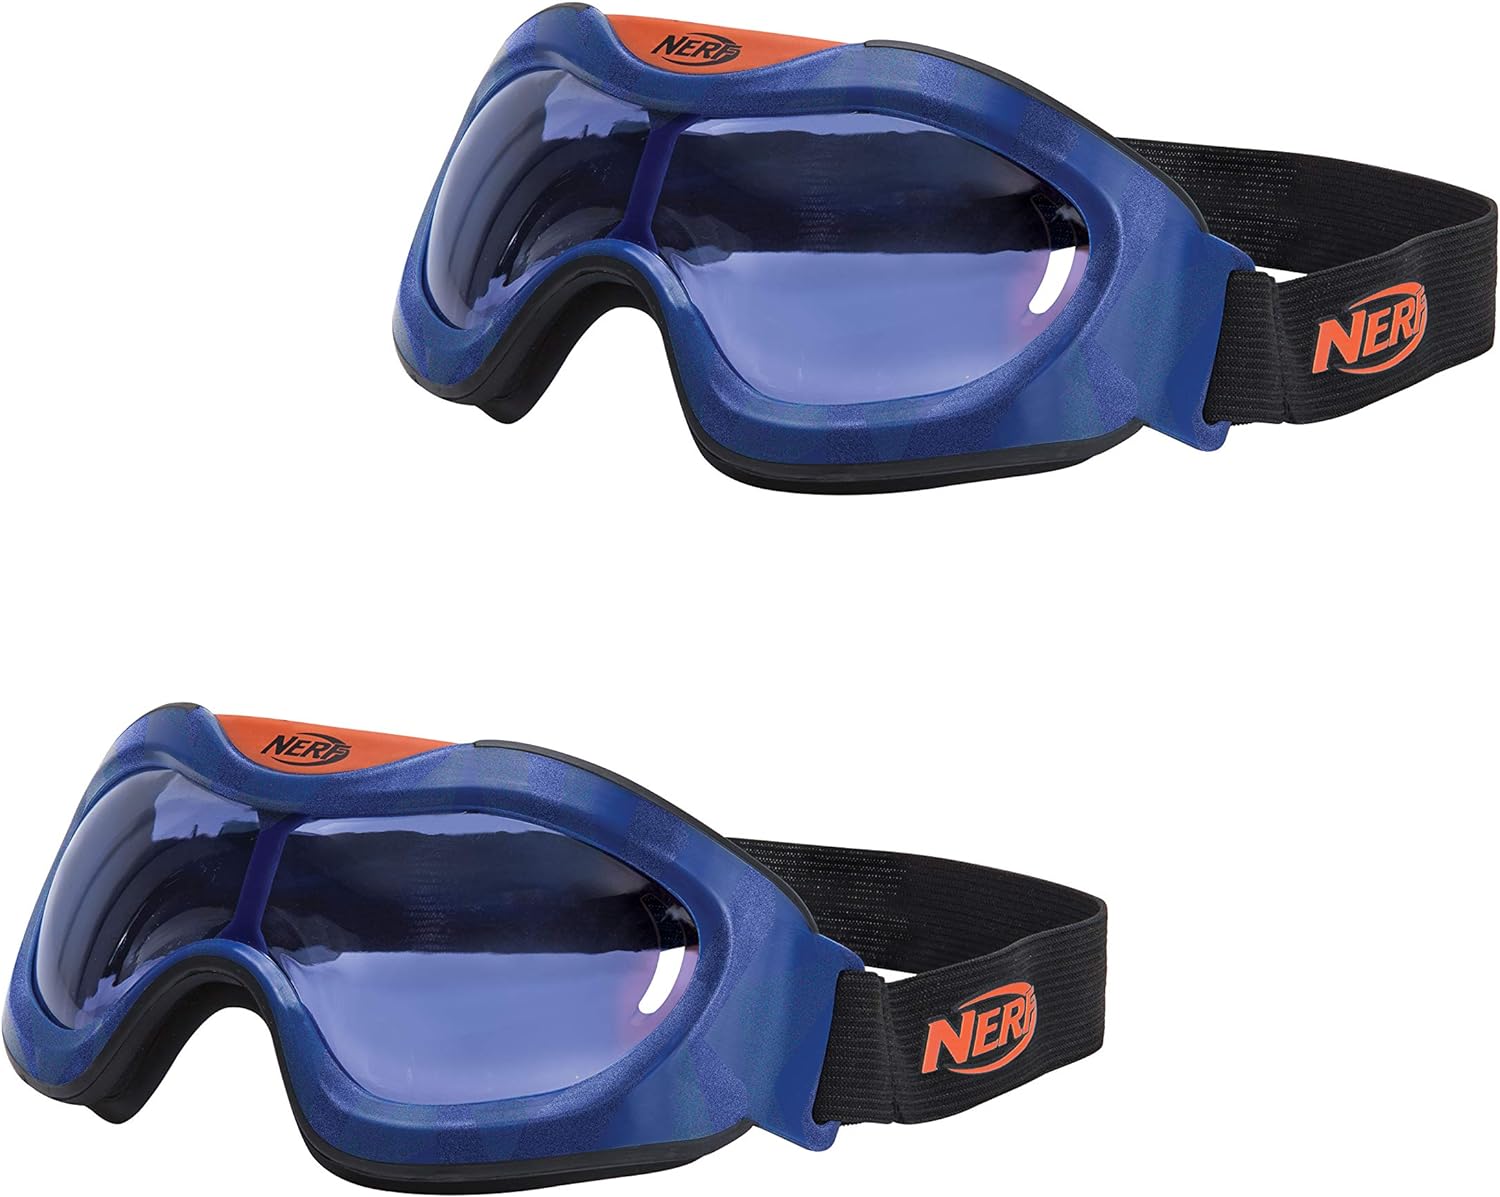 If you are a mom who is worried about nerf guns. These are a must have. The kids LOVE wearing these. They even wear them when not playing with their nerf guns! Too funny!